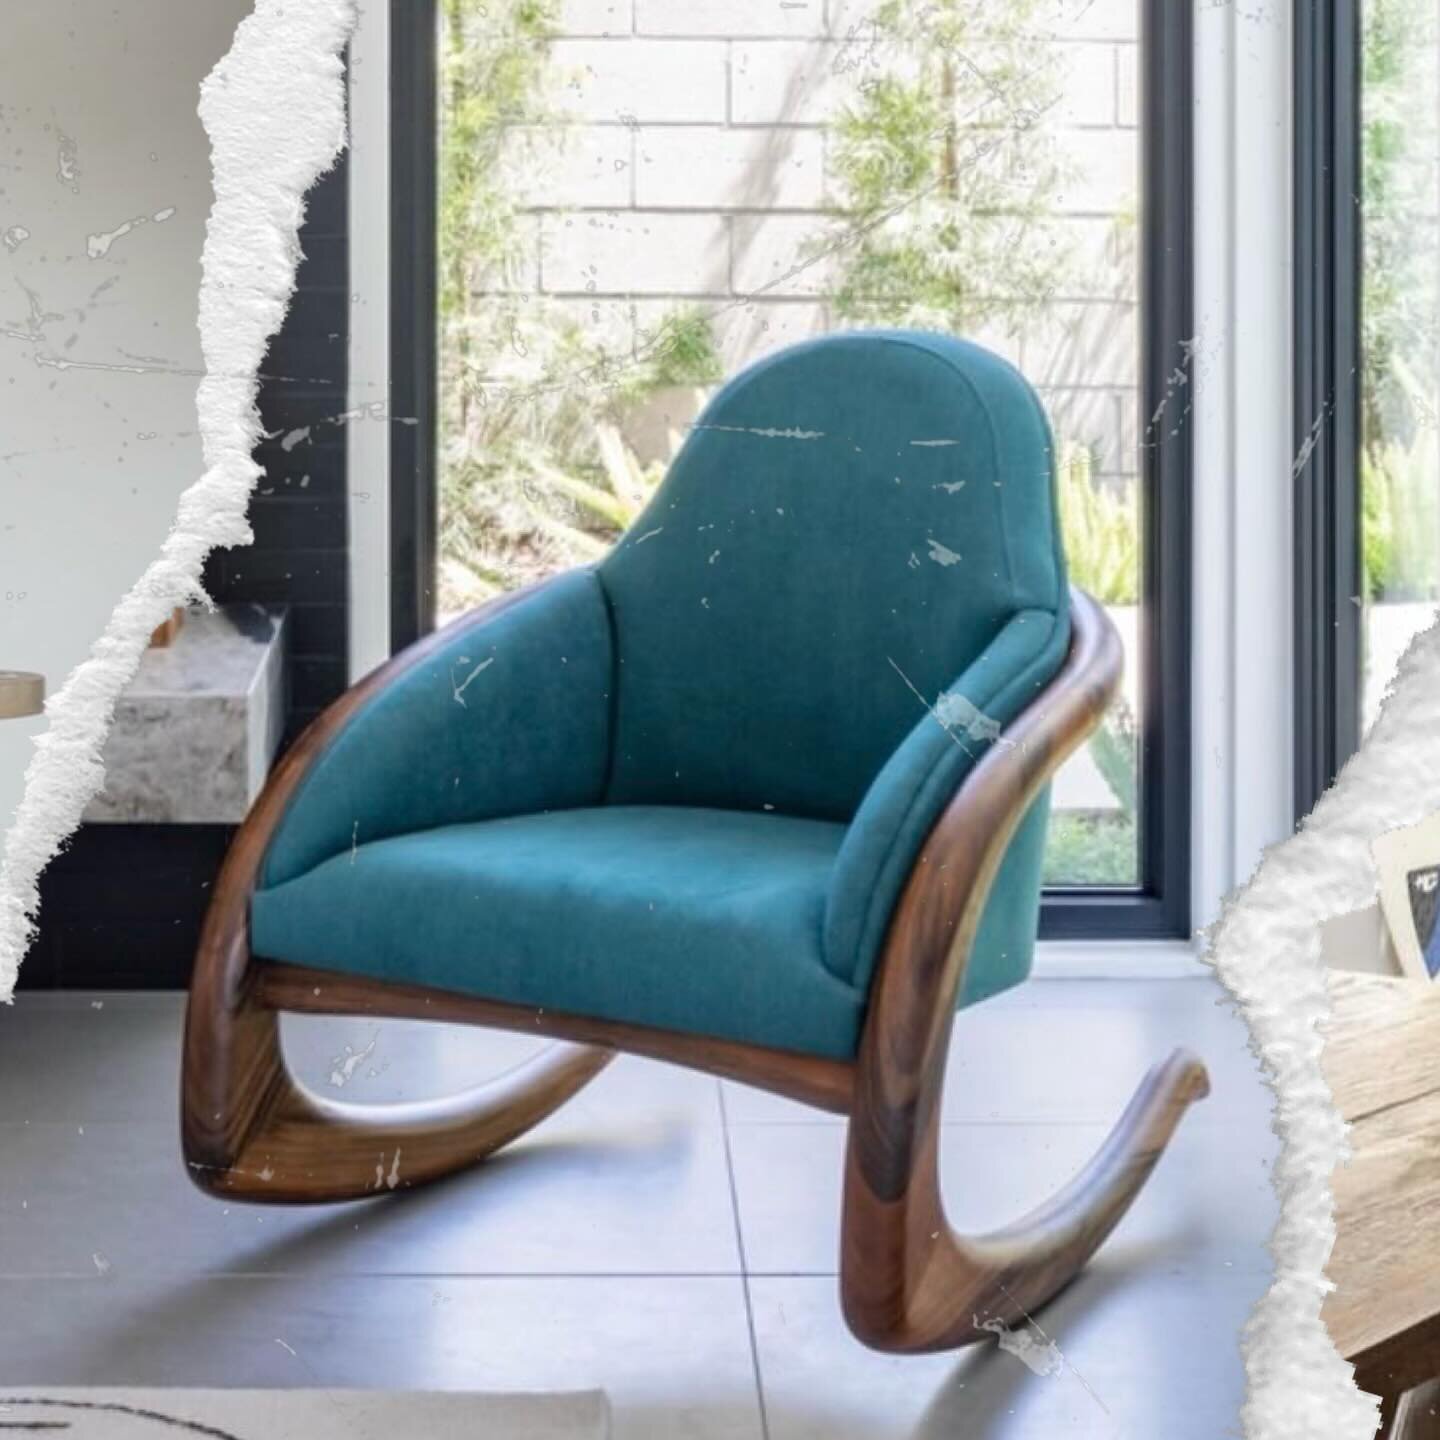 We love the curves of this Turkish-inspired custom organic rocker. Swipe ➡️ to see another @house_of_morrison x @felicidad moment that makes our heart sing 🌊 
&ldquo;Mediterranean Summer I&rdquo; Limited Edition Photograph by @felicidad 
#homestagin